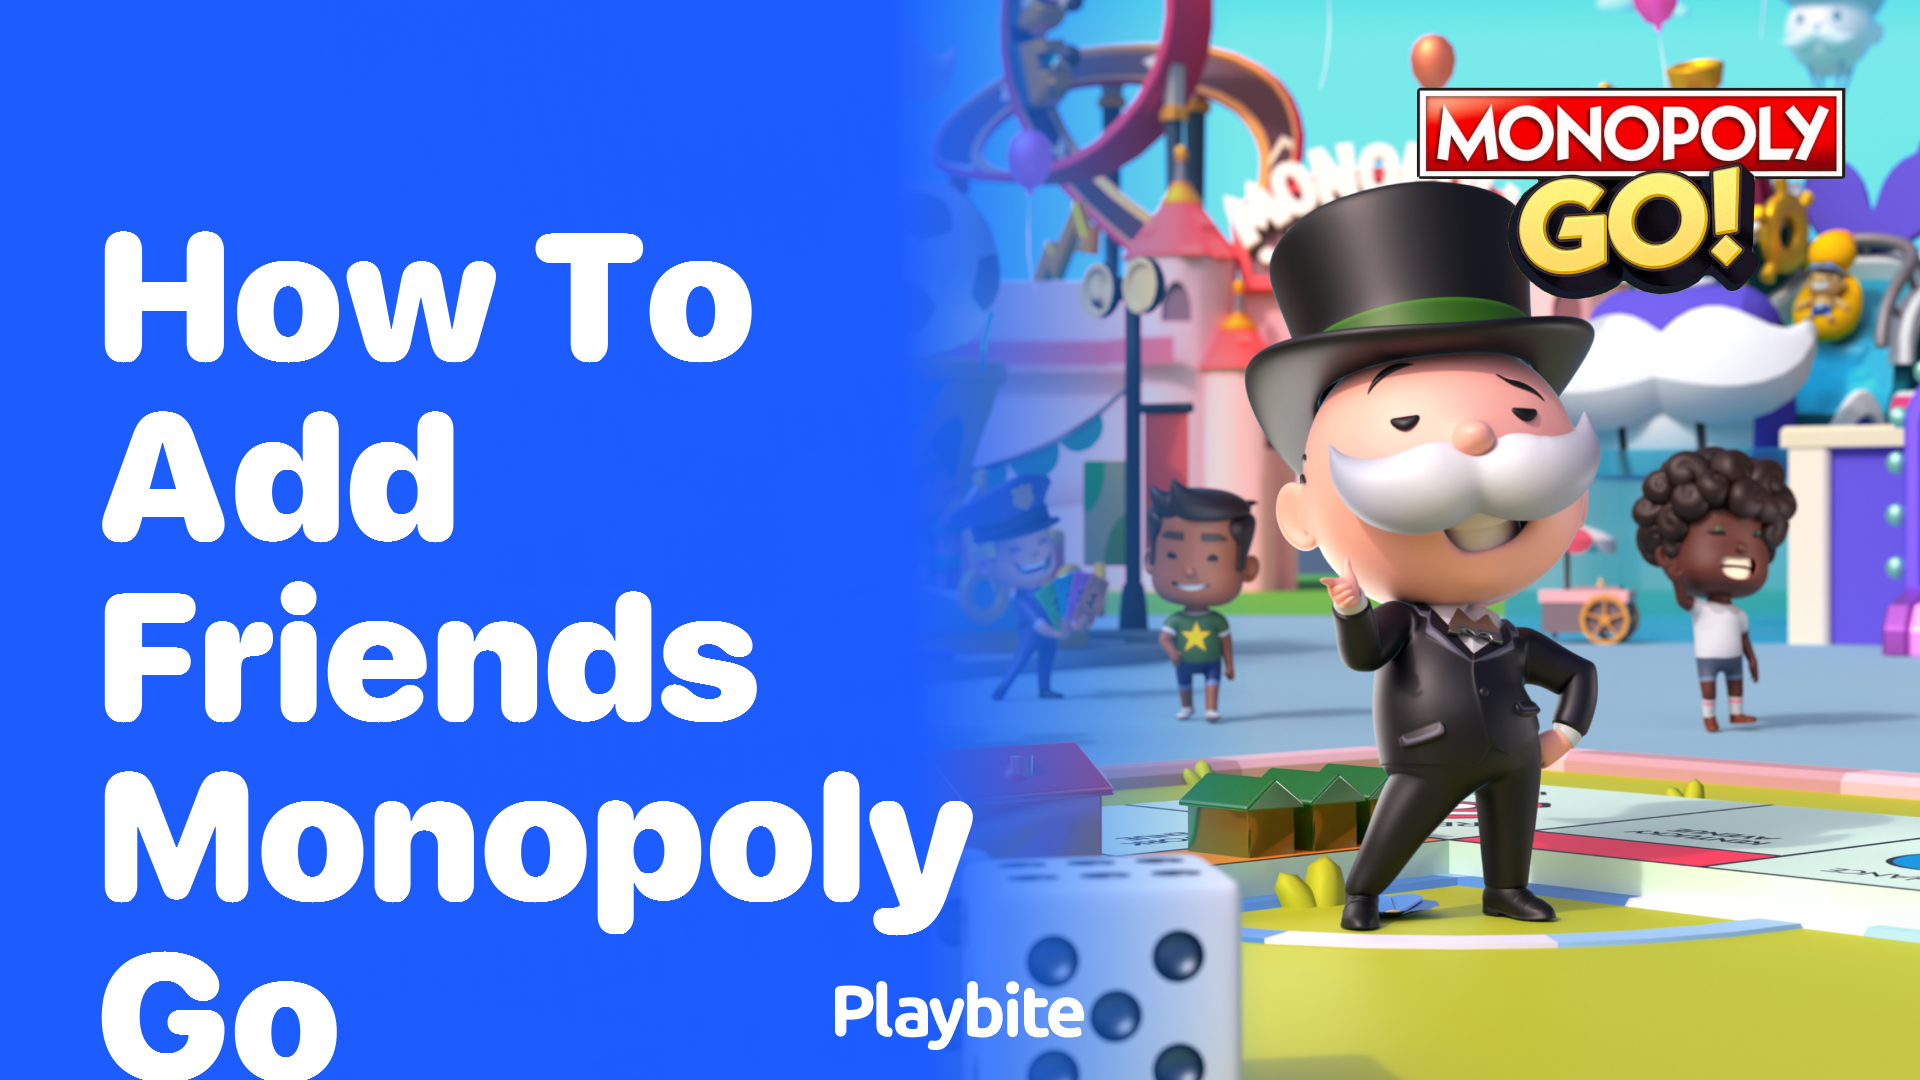 How to Add Friends in Monopoly Go: A Quick Guide